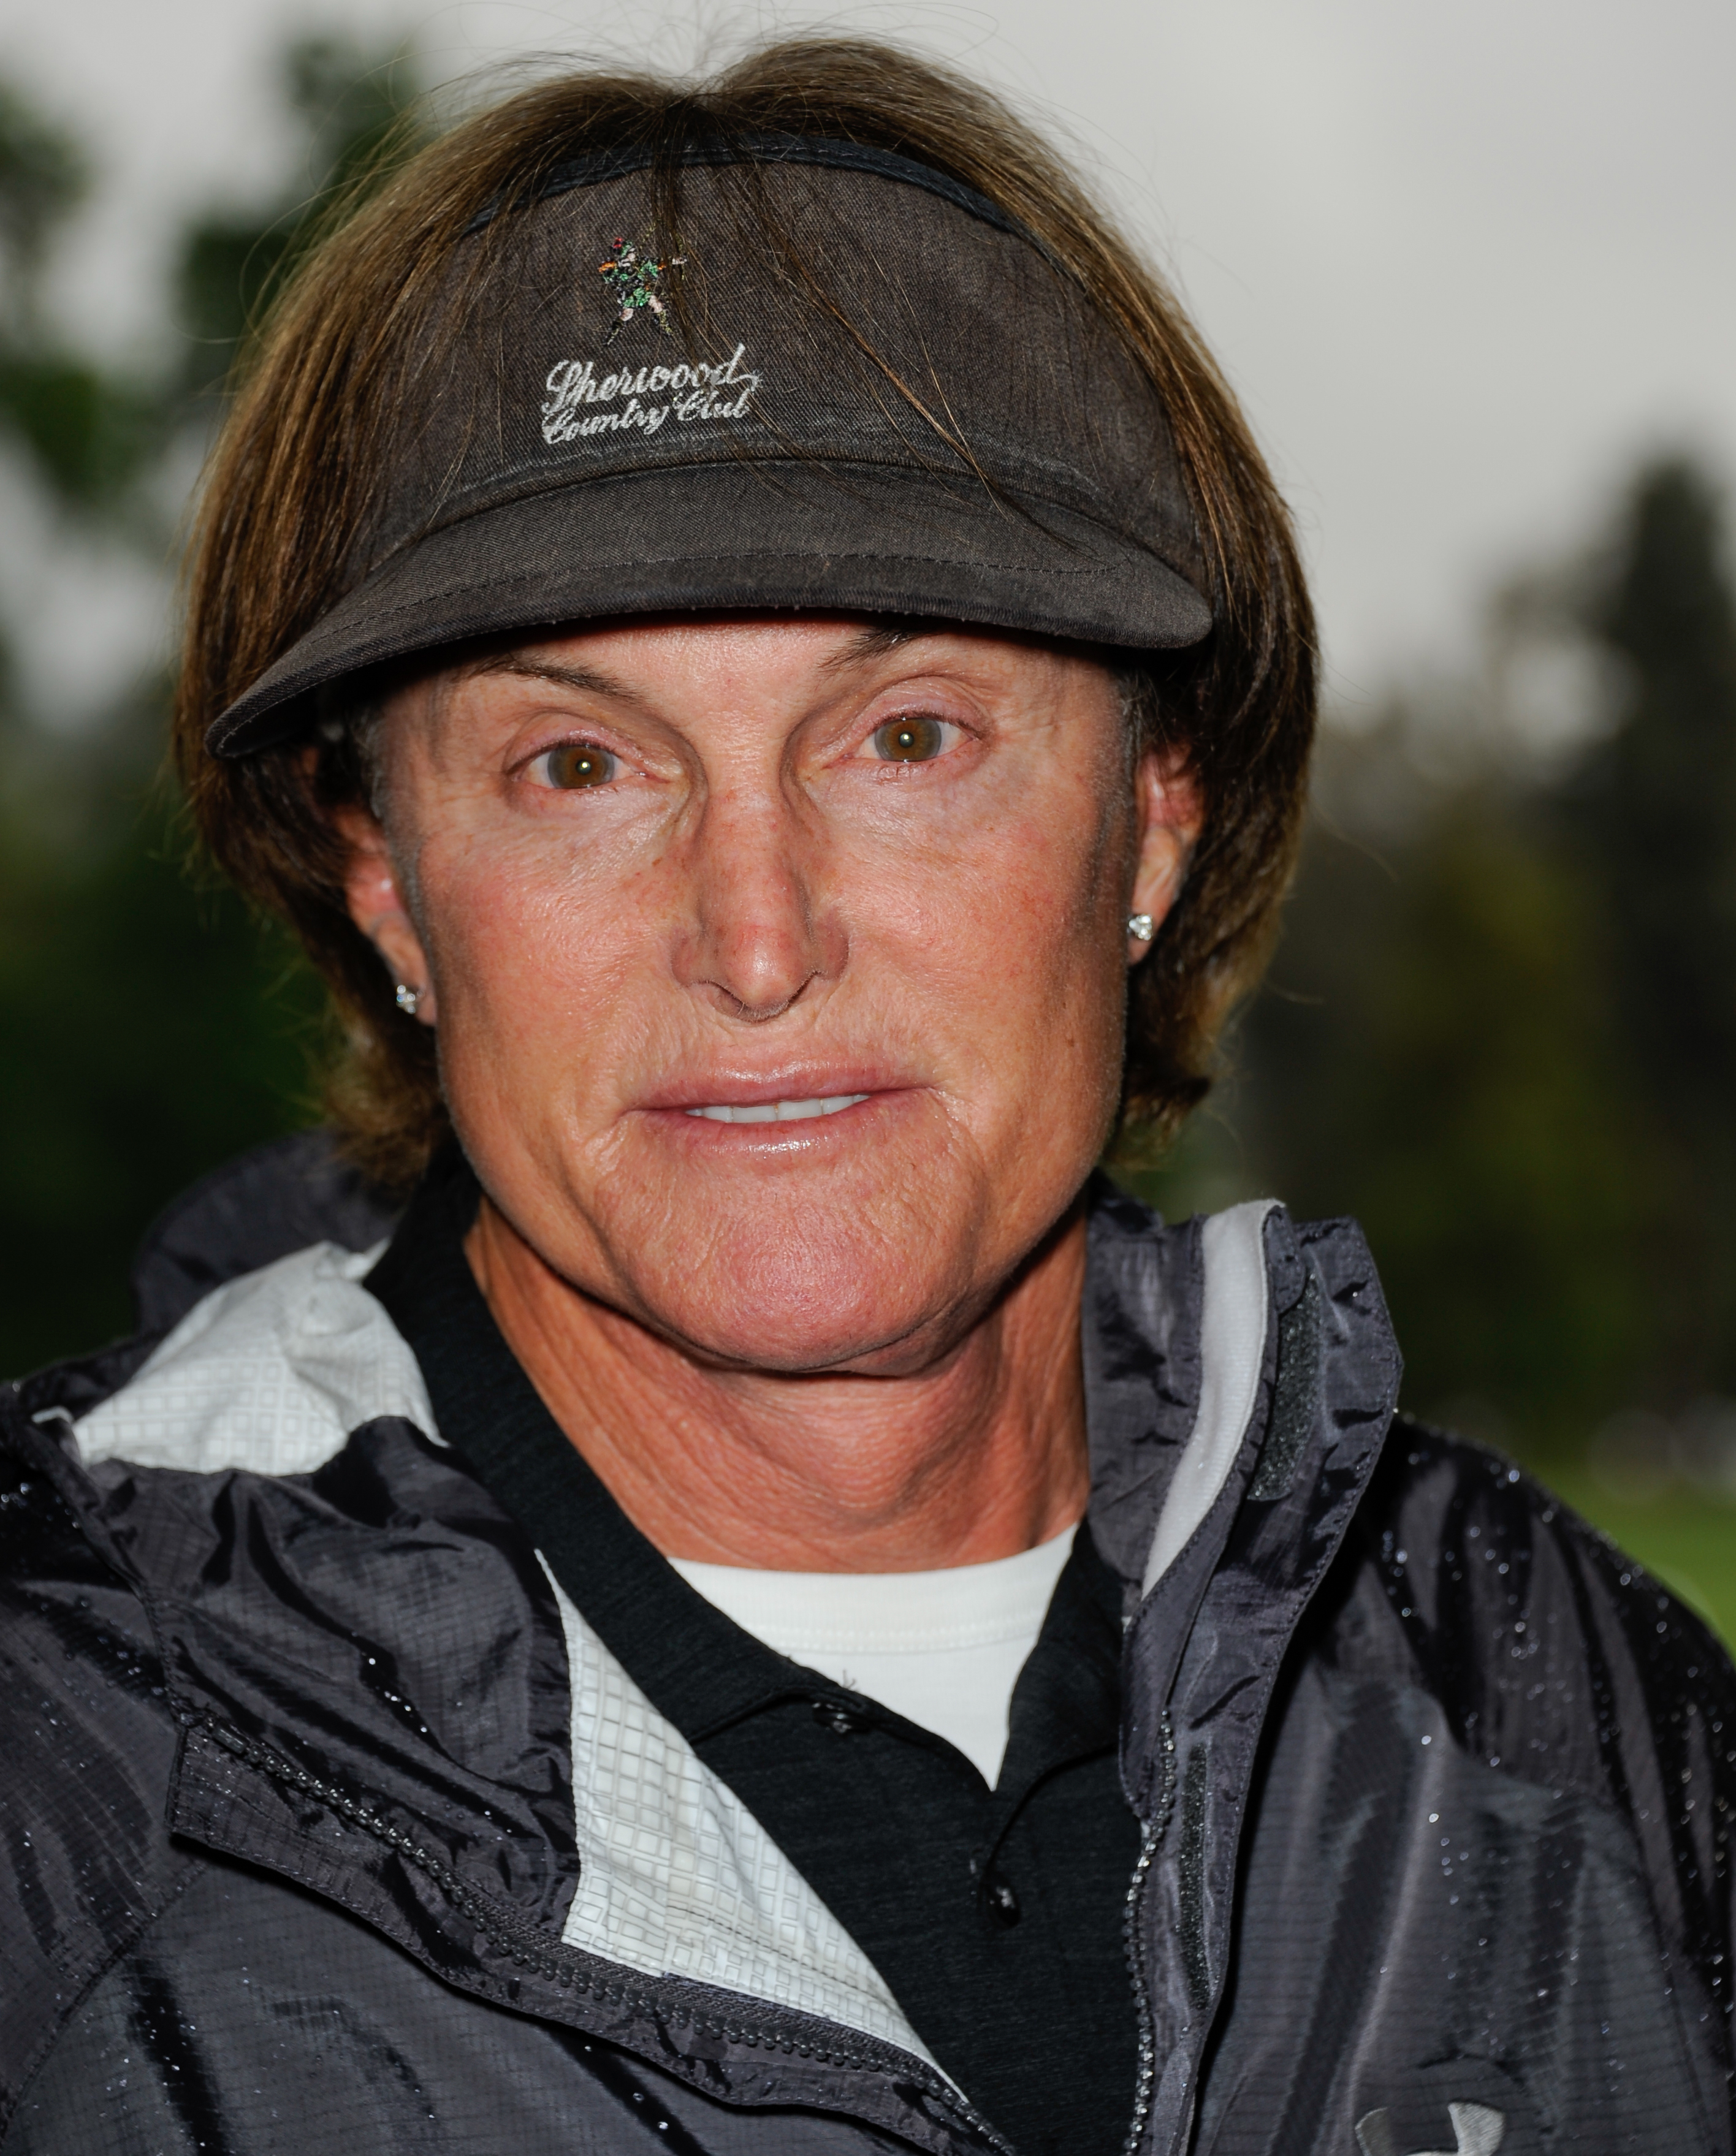 In this May 6, 2013 file photo, former Olympic athlete Bruce Jenner arrives at the 6th Annual George Lopez Celebrity Golf Classic at the Lakeside Golf Club in Toluca Lake, Calif. (Richard Shotwell—Invision/AP)